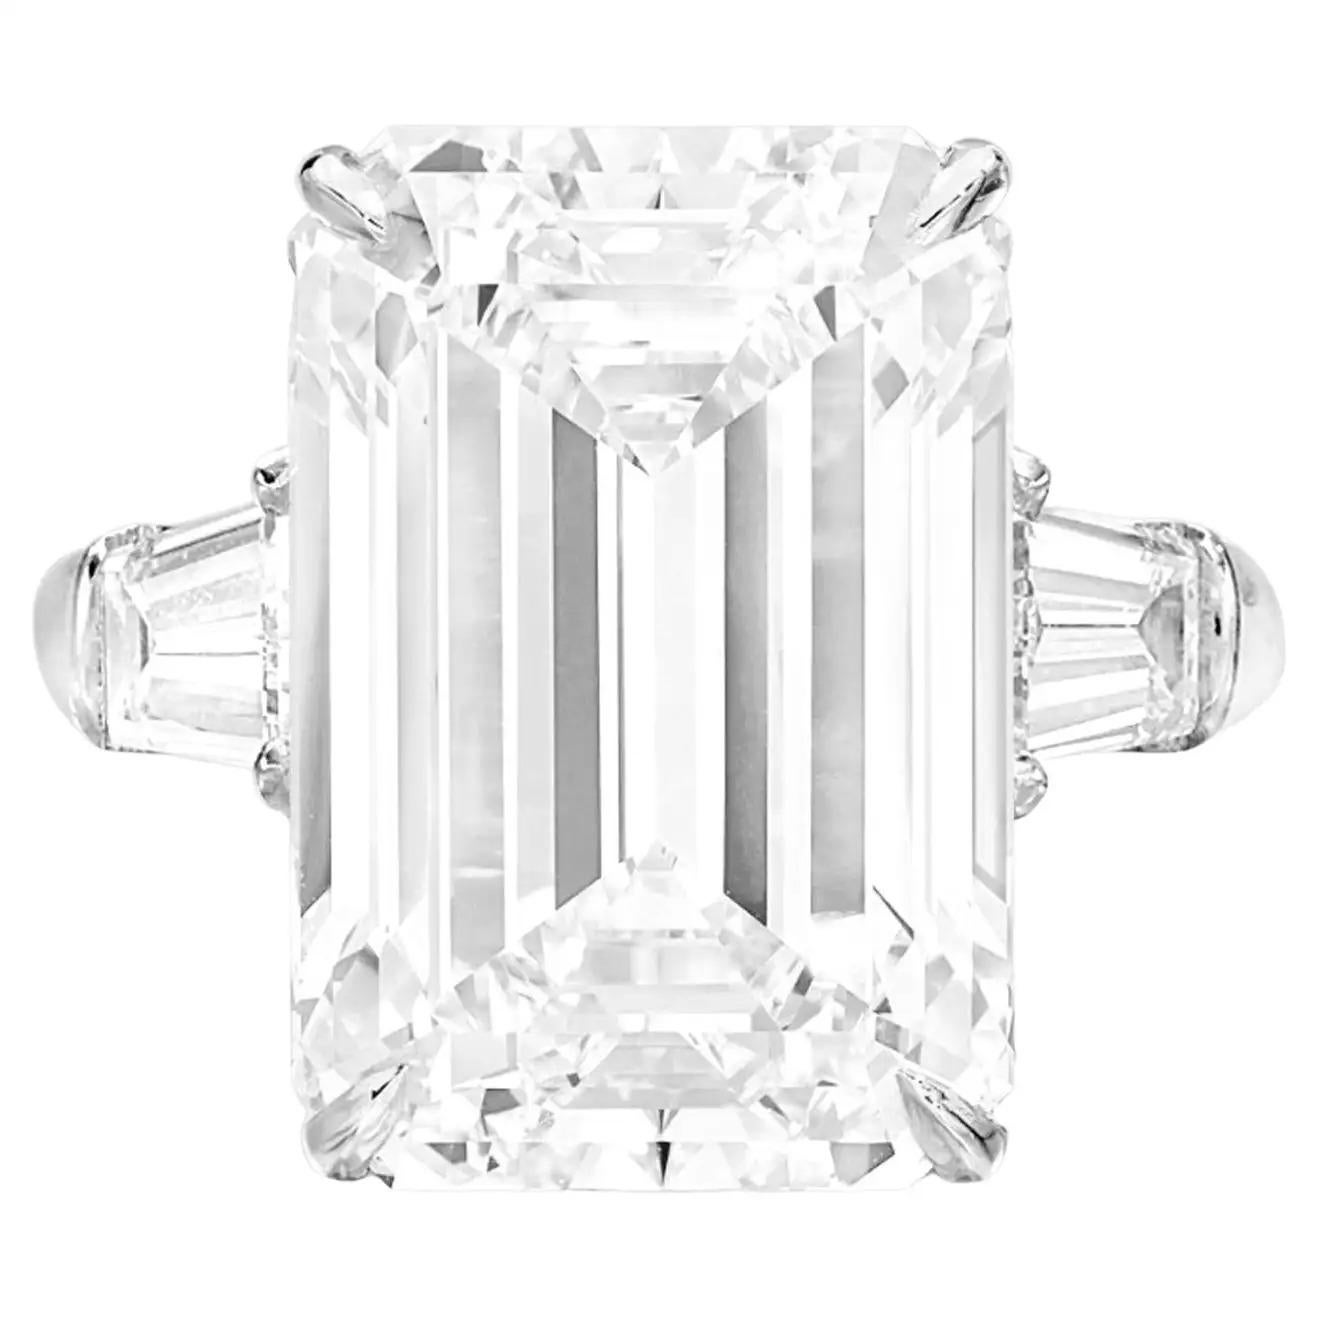 Magnificent emerald cut diamond ring  Speechless 10 Carats Emerald Cut VS1 in clarity. Certified by GIA

Centering a stunning 10 Carat GIA certified emerald cut diamond, flanked by two tapered baguette diamonds and set in solid platinum